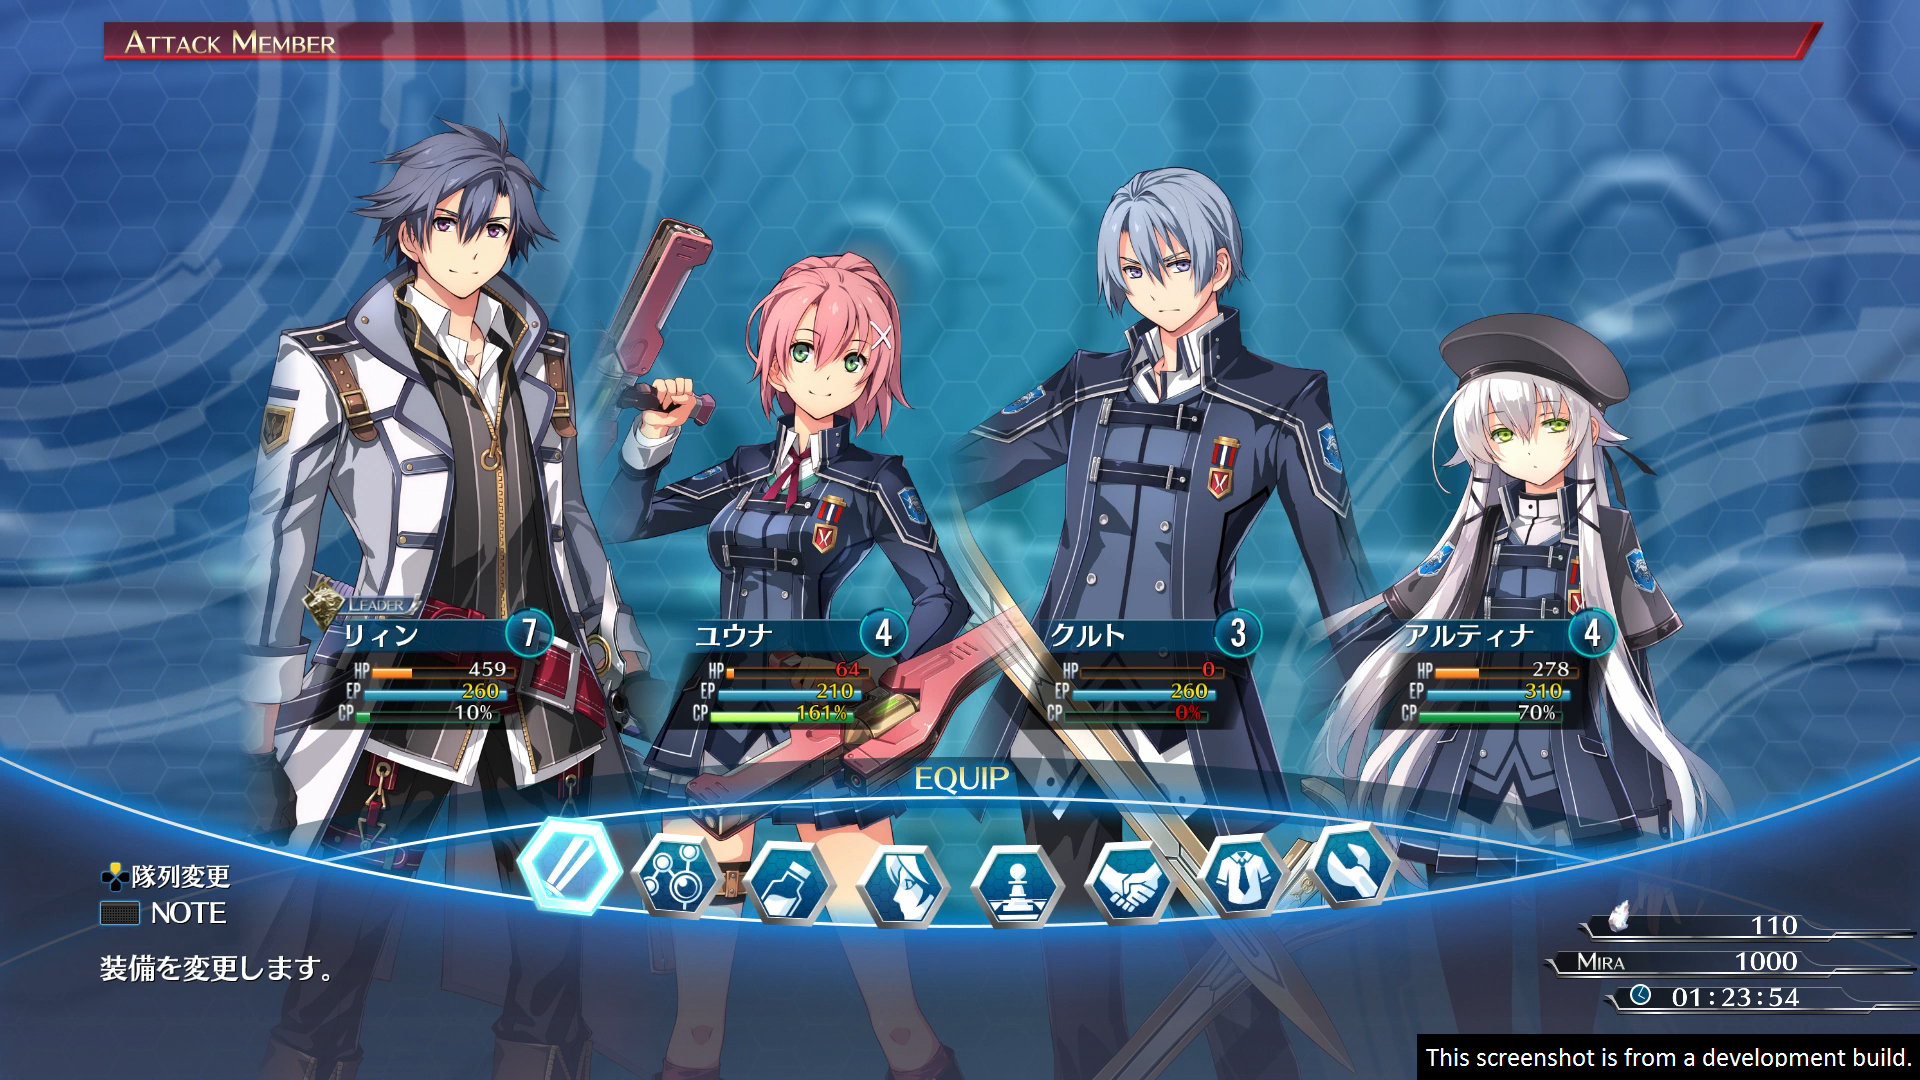 The Legend Of Heroes: Trails Of Cold Steel III - Thors Academy Edition - PS4®